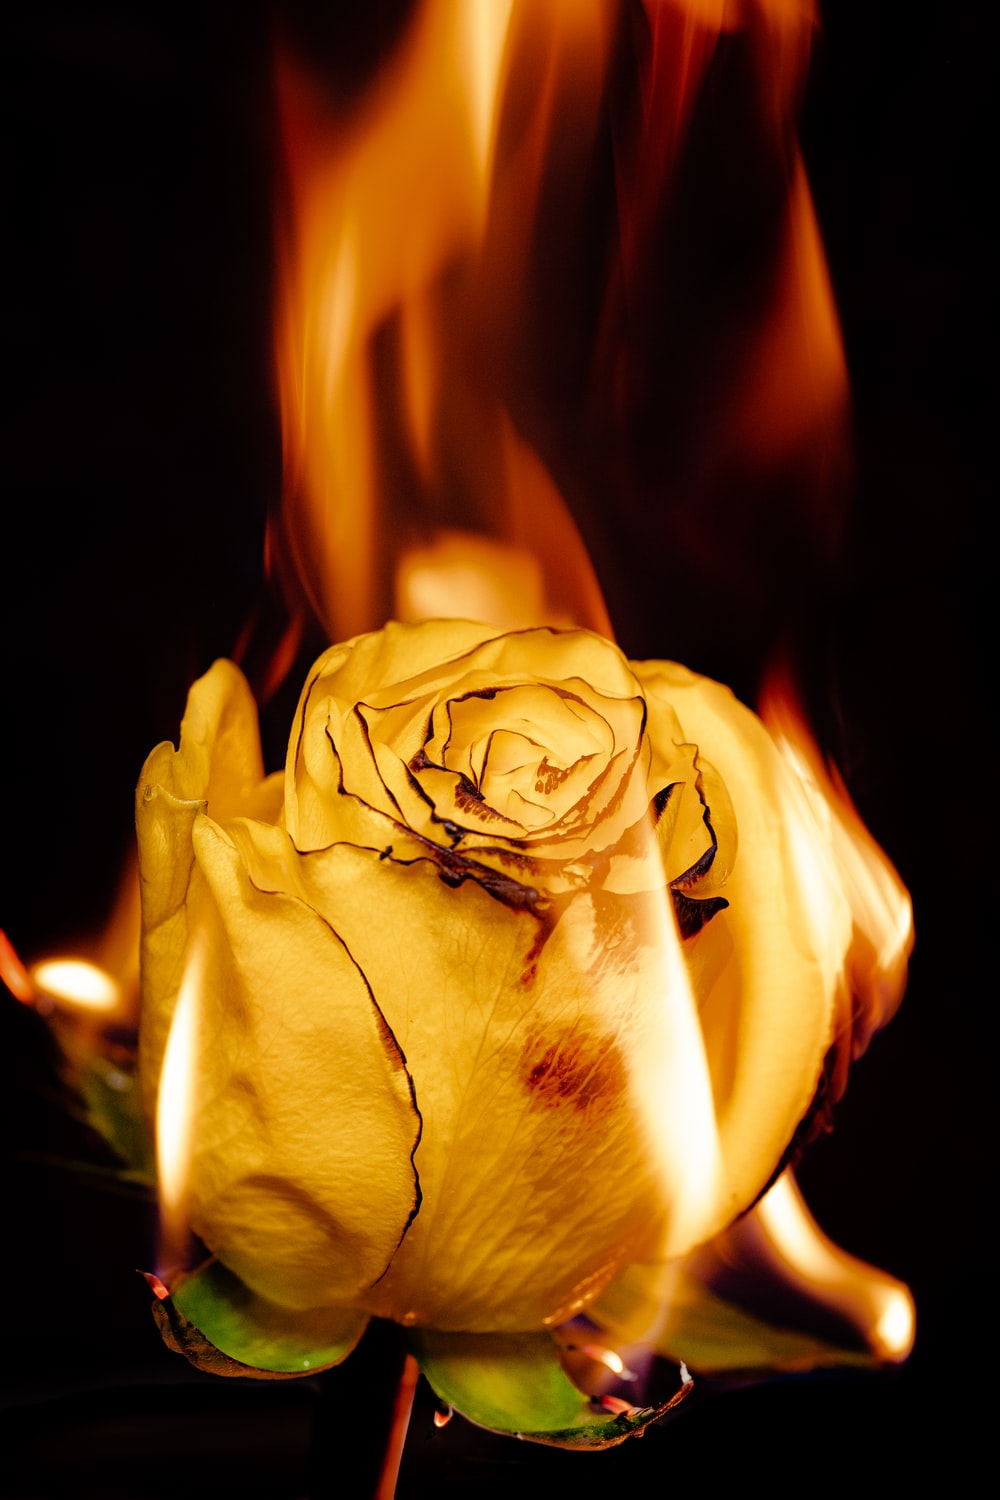 Burning Flower Picture. Download Free Image